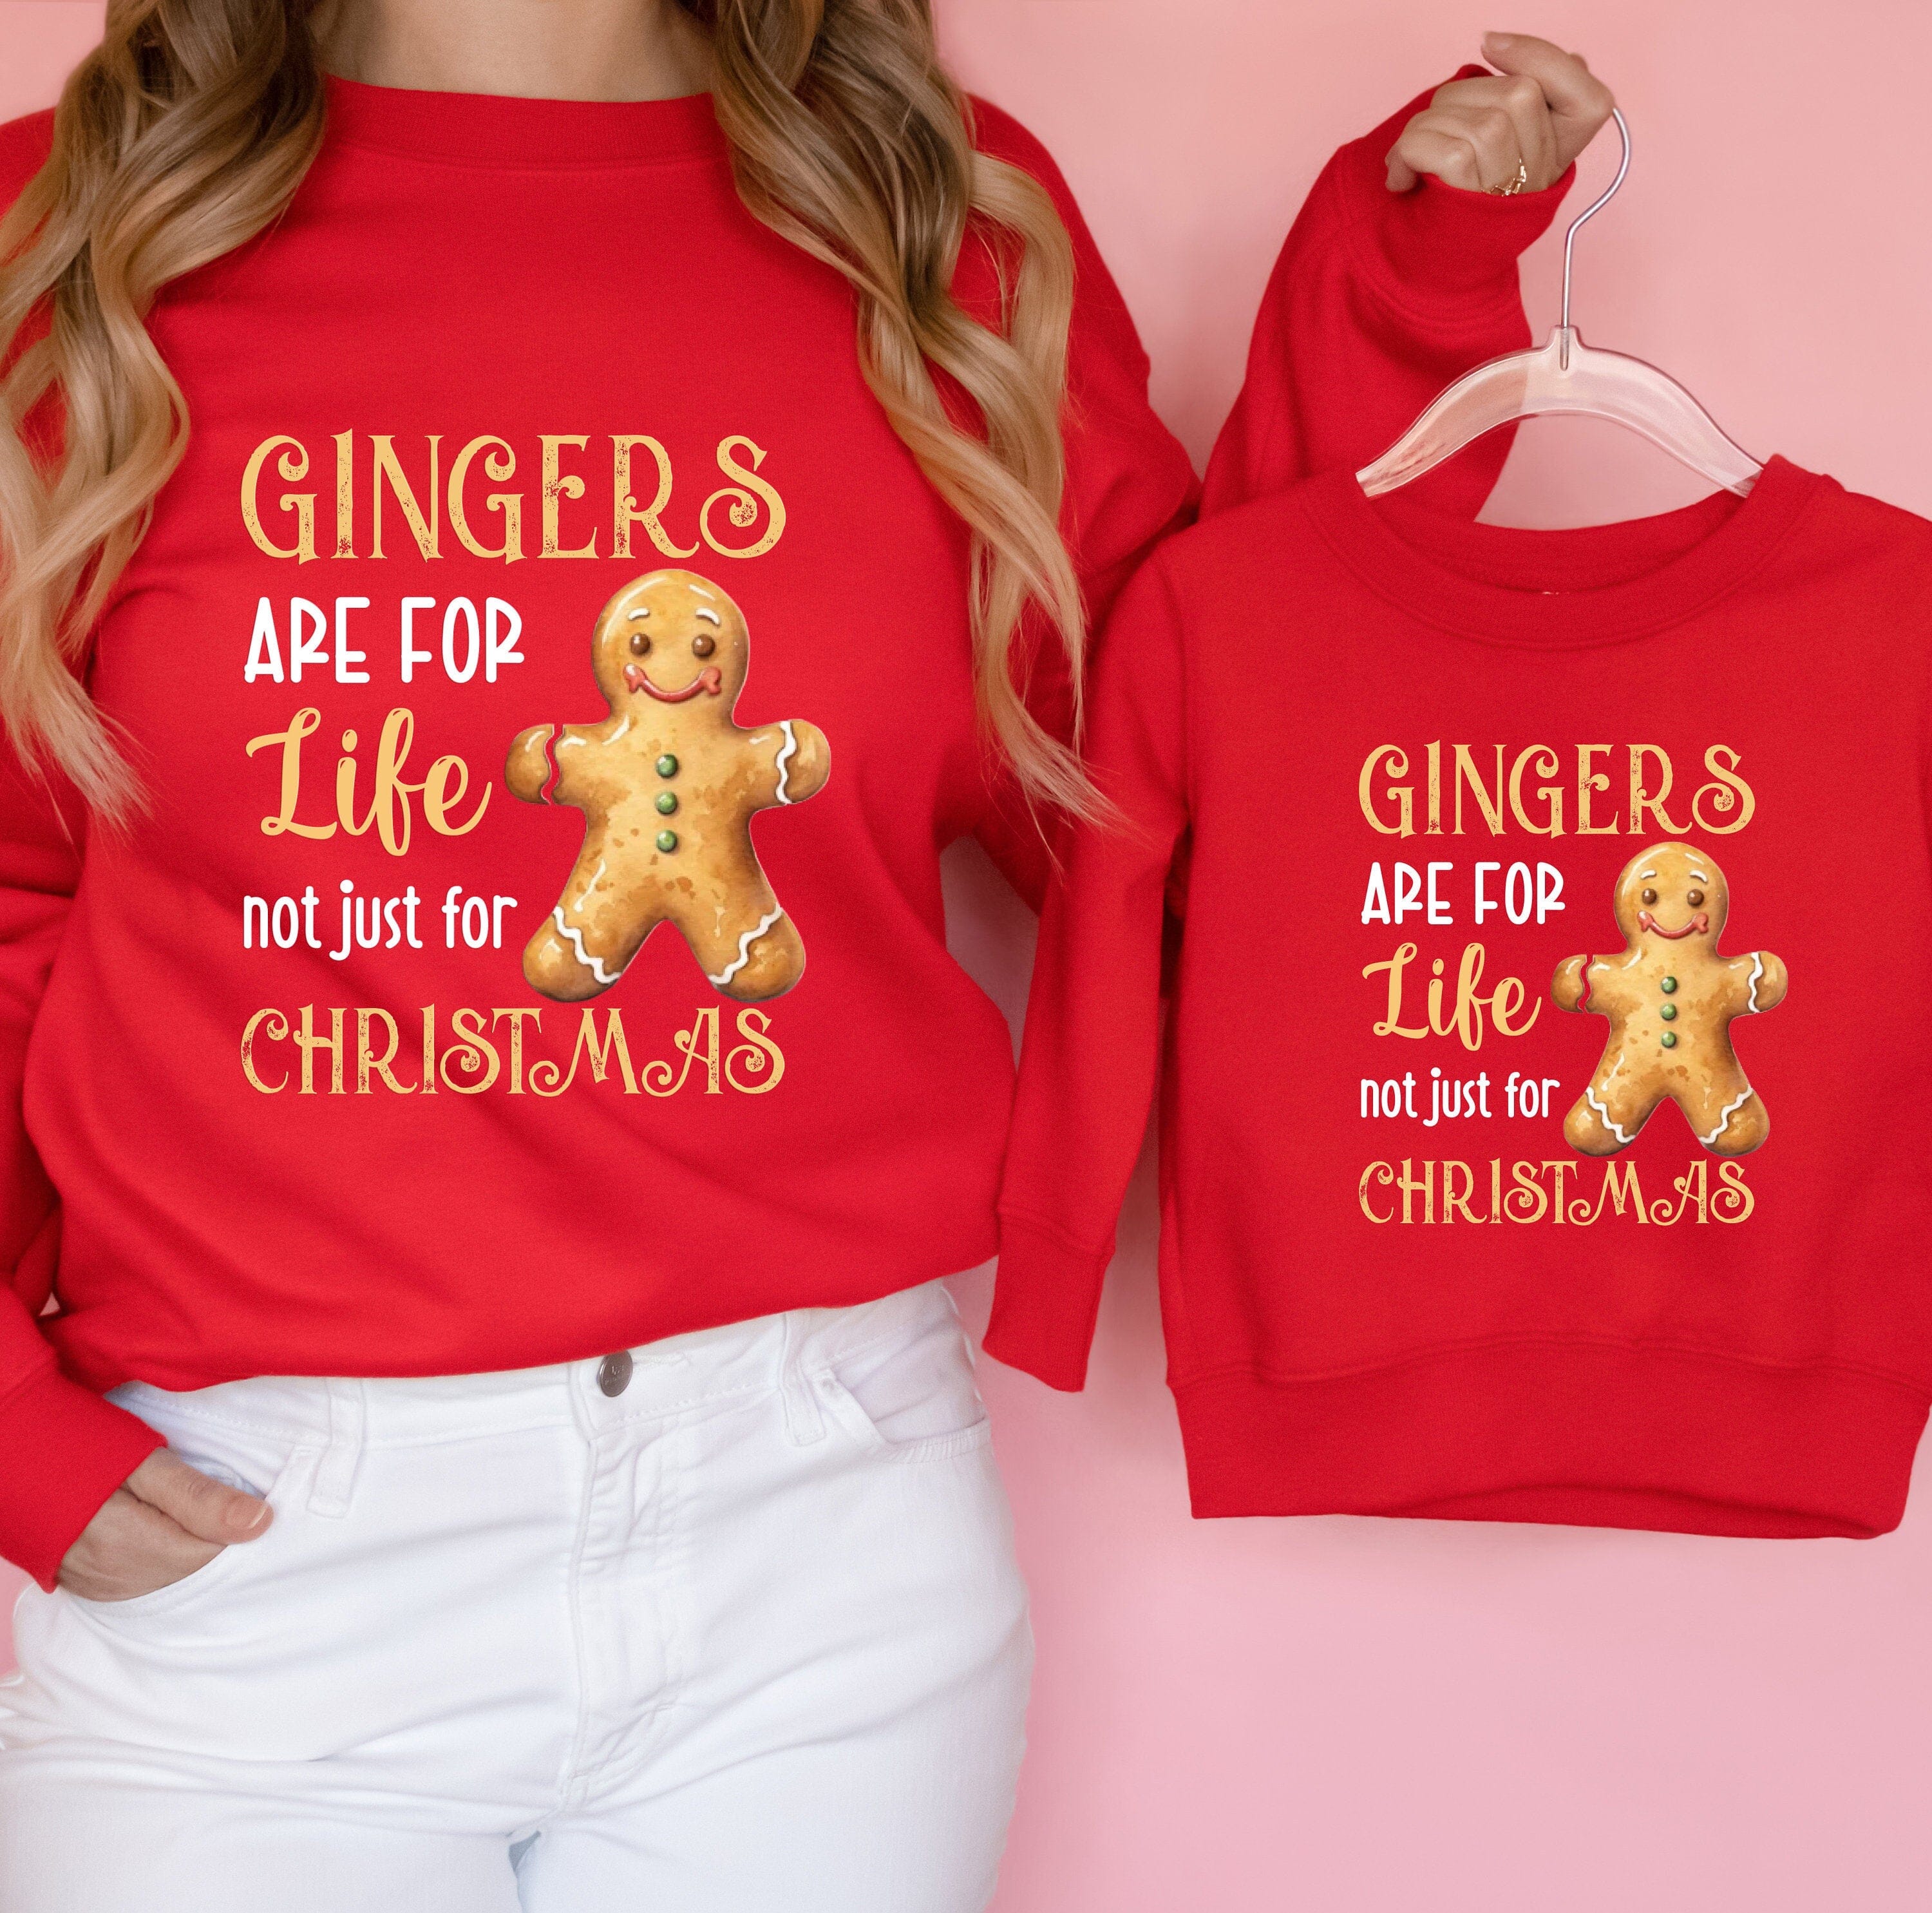 Gingers Are For Life Not Just For Christmas Jumper, Gift For Her And Him, Adult Kids, Xmas Sweatshirt